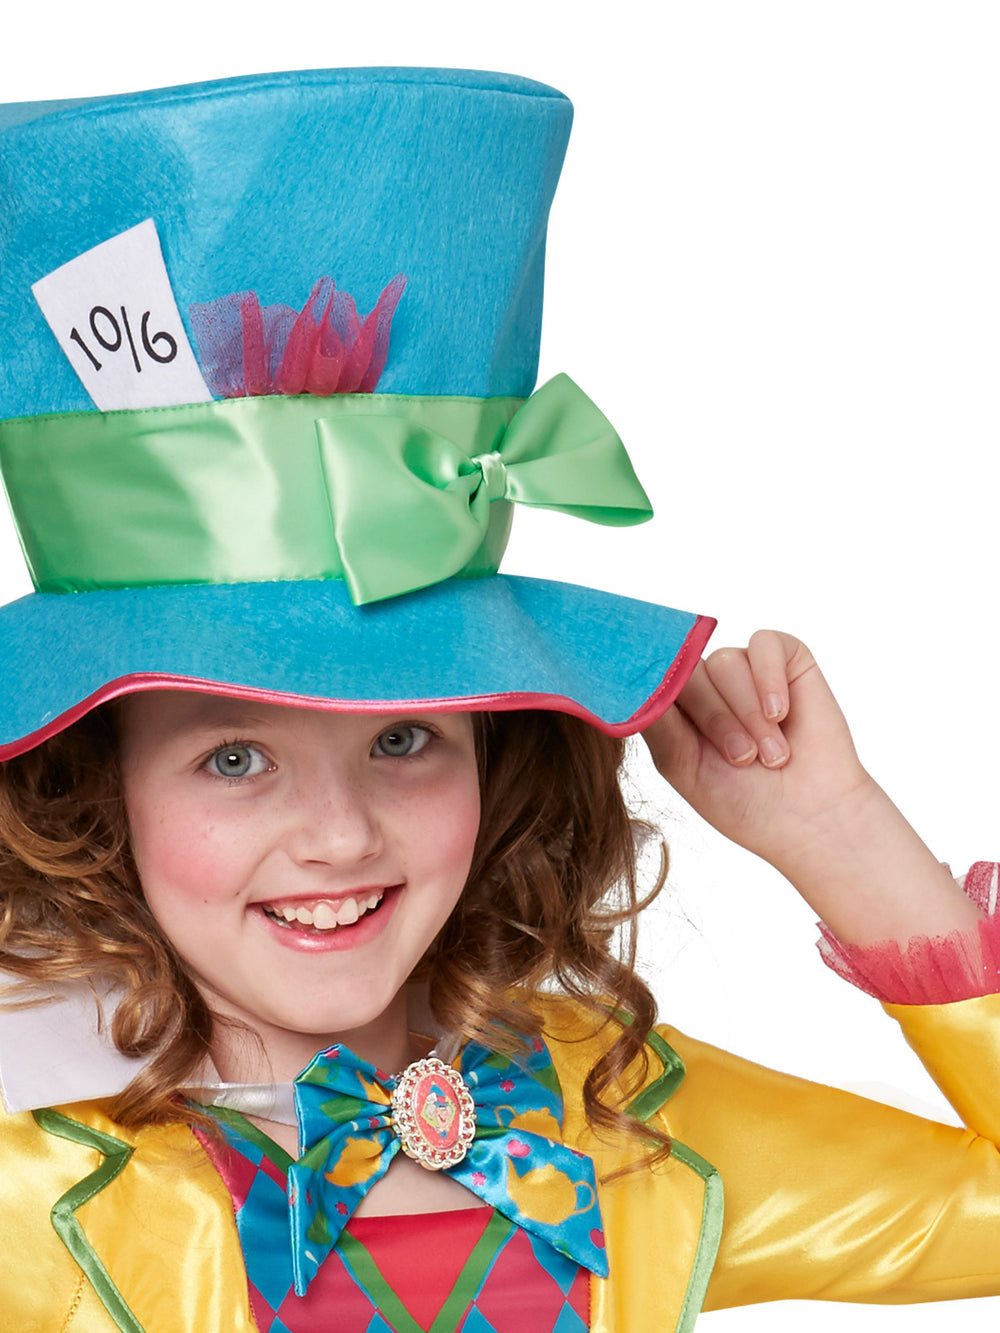 MAD HATTER GIRLS DELUXE COSTUME (LARGE POLYBAG), CHILD - Little Shop of Horrors